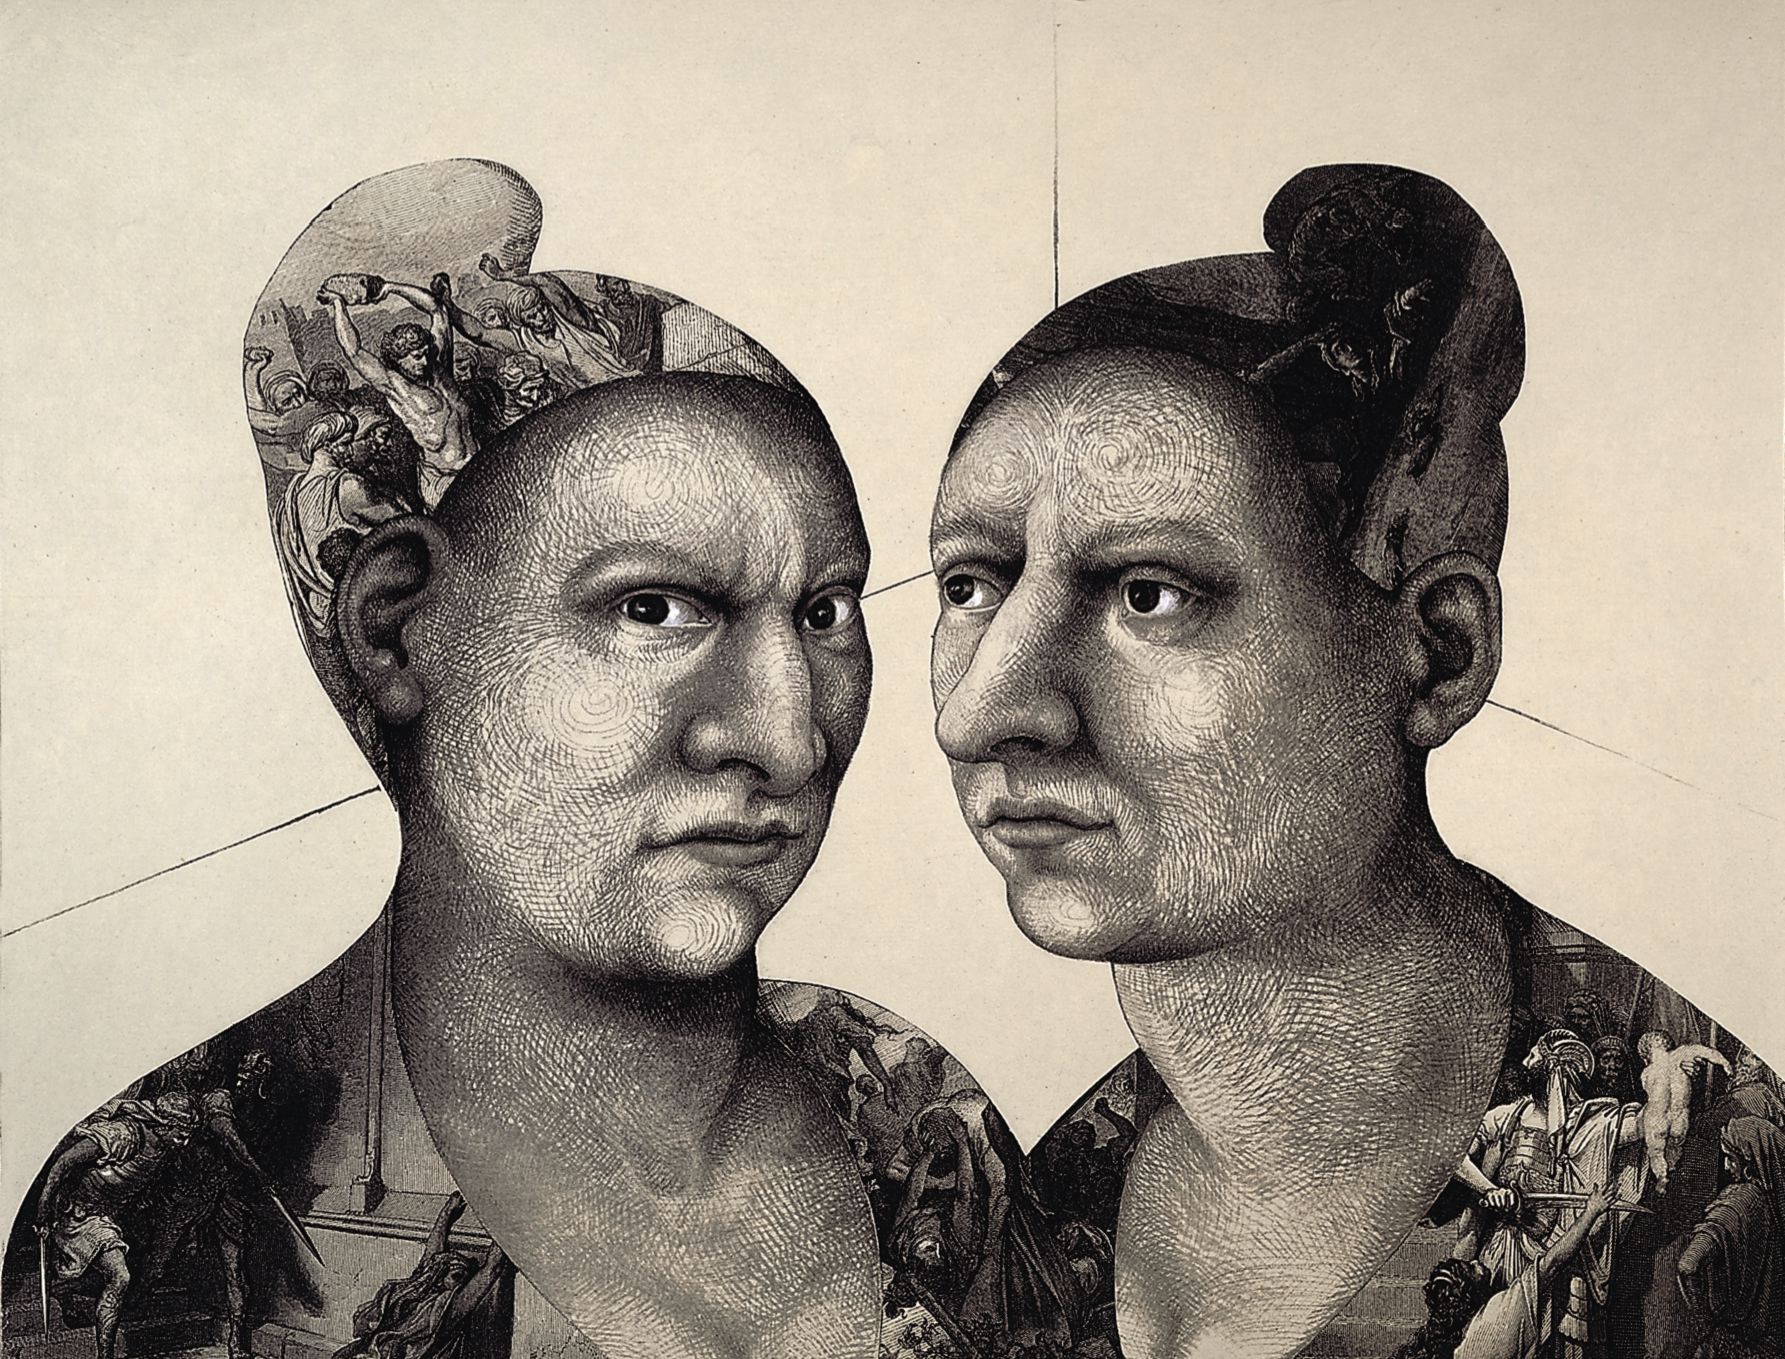 Women's Studies   2005 polymer gravure etching with chine collie & gouache, ed. 40, 14 x 18 inches